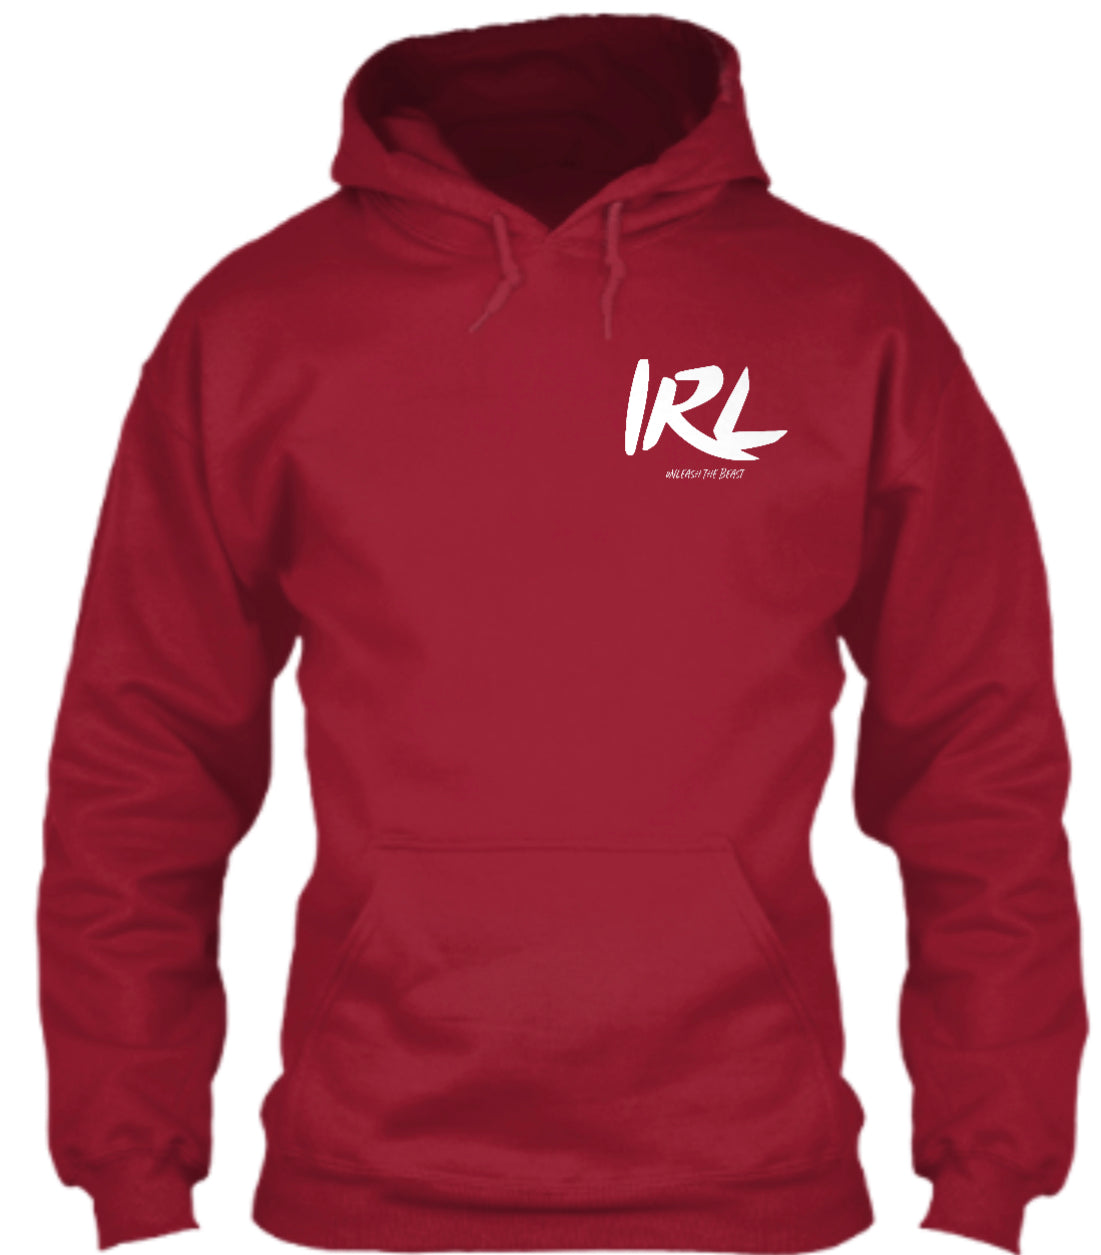 IRL RED HOODIE